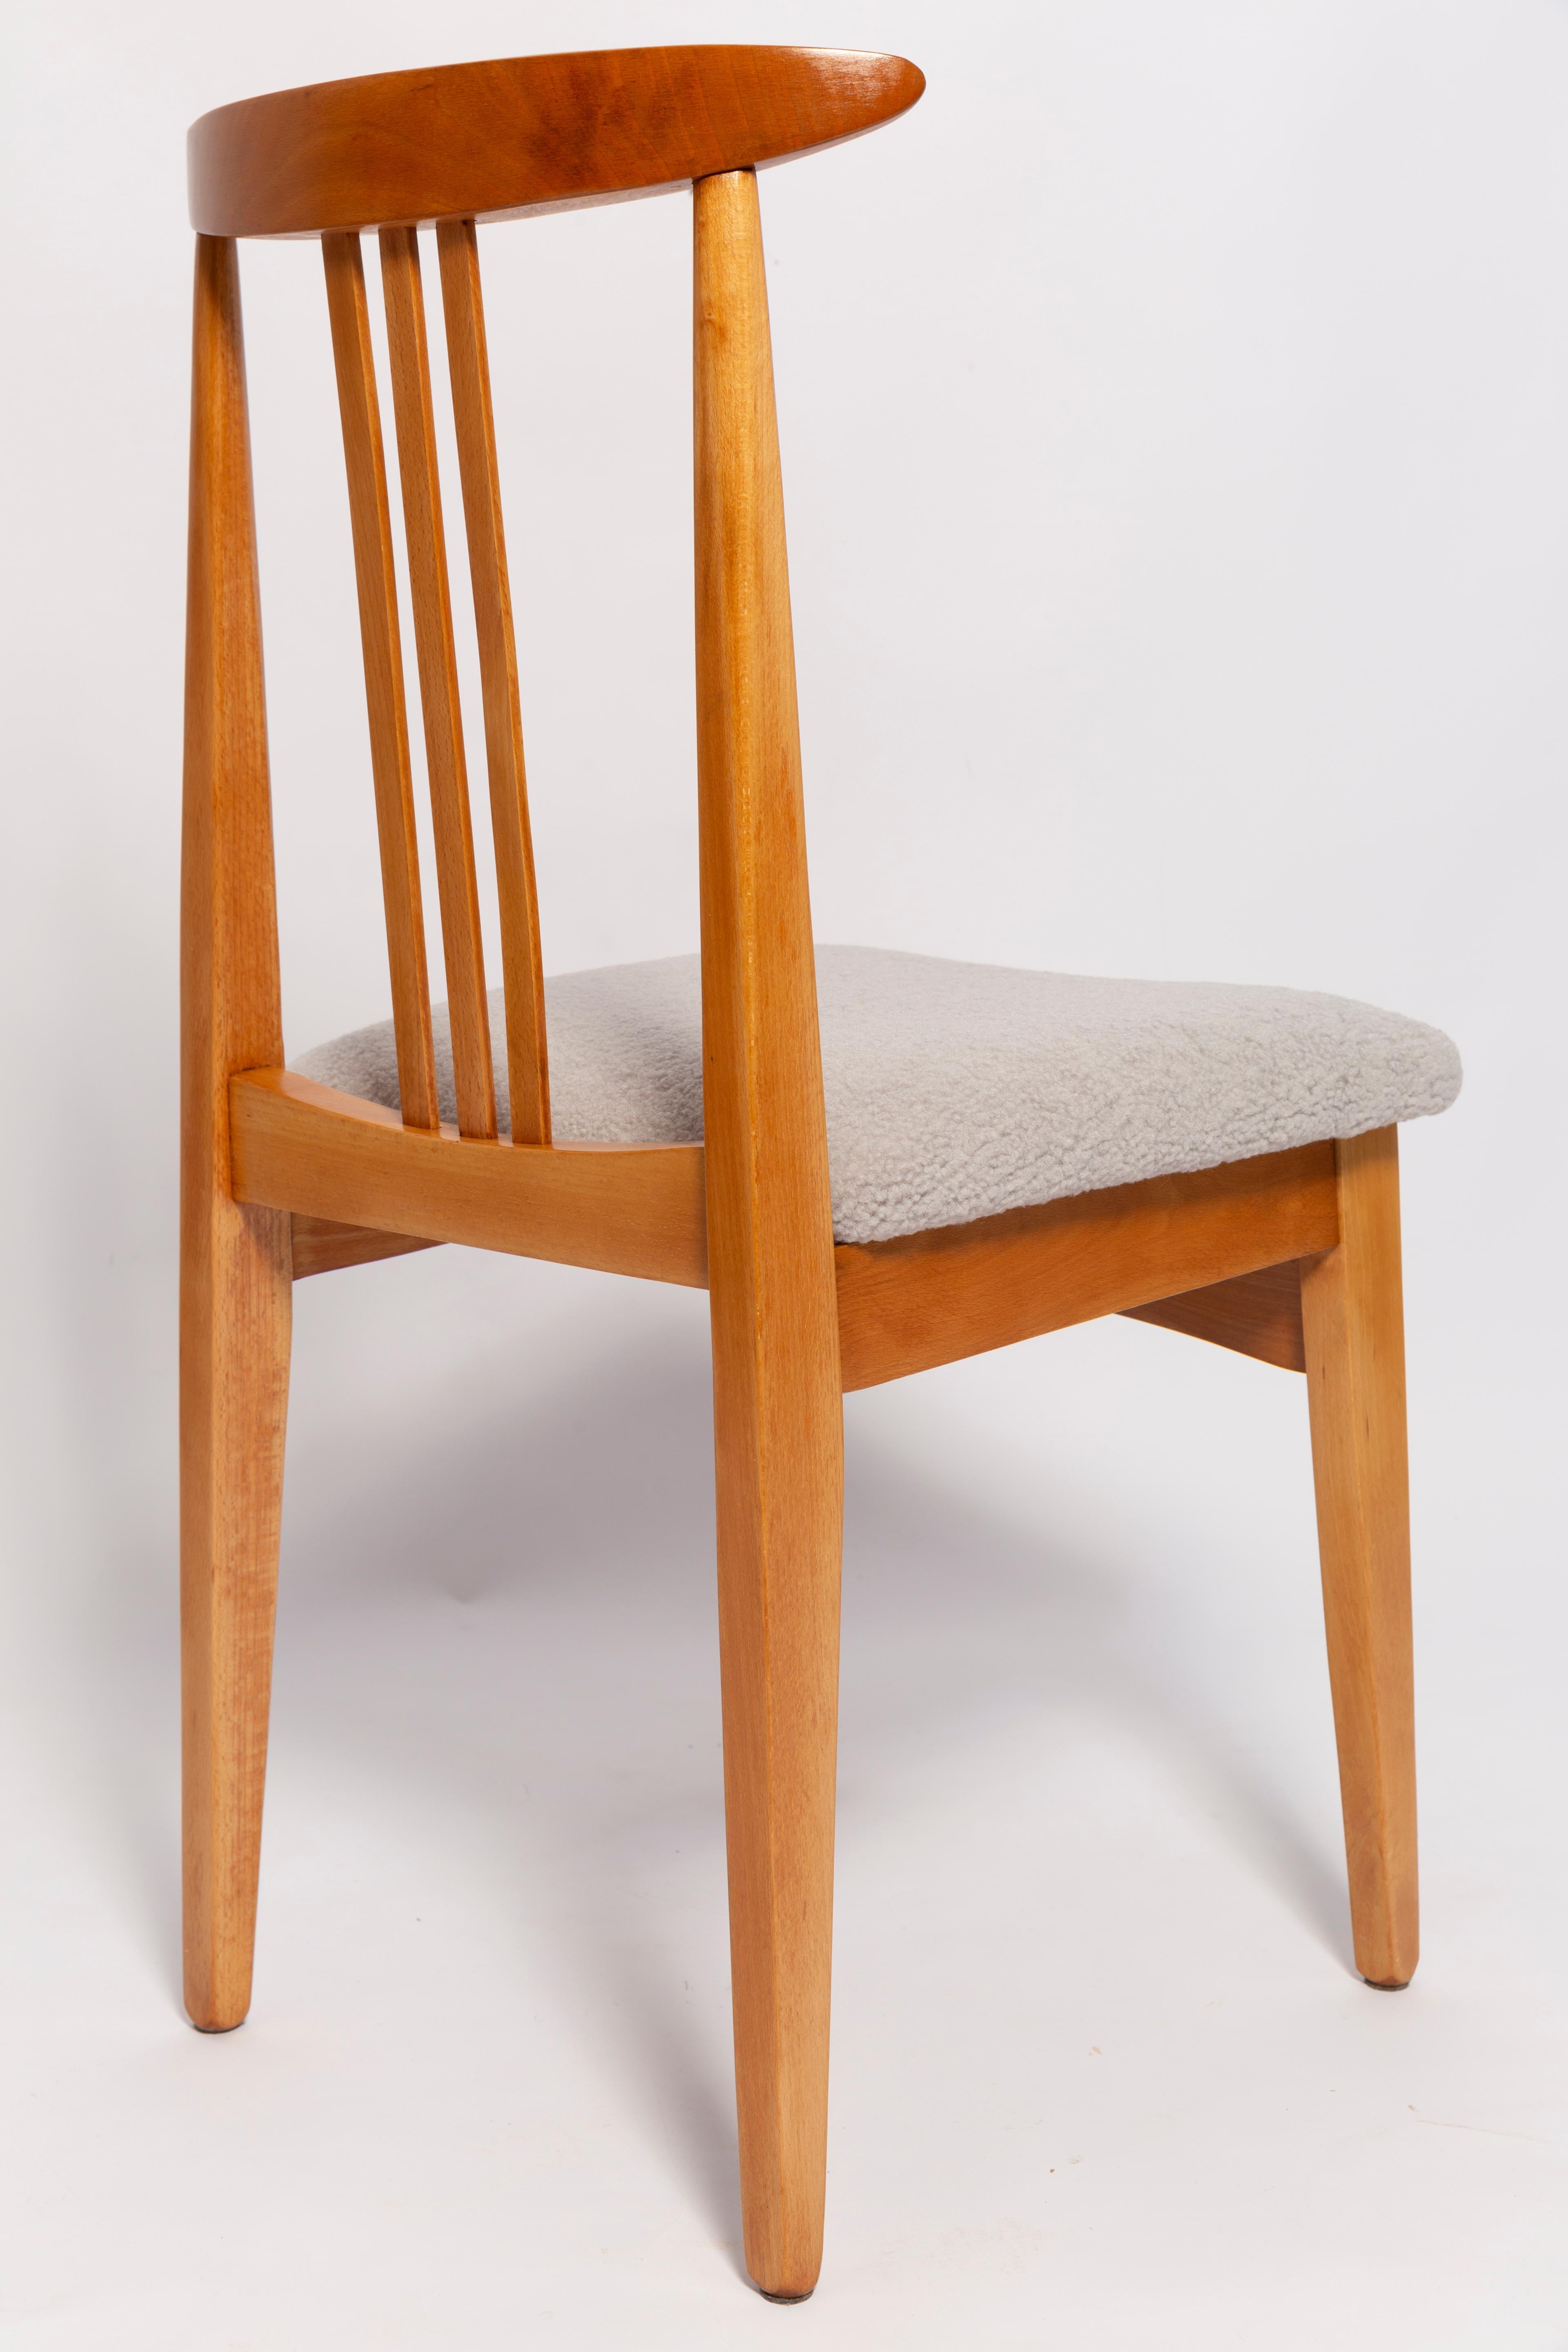 Polish Mid-Century Linen Boucle Chair, Light Wood, by M. Zielinski, Europe, 1960s For Sale